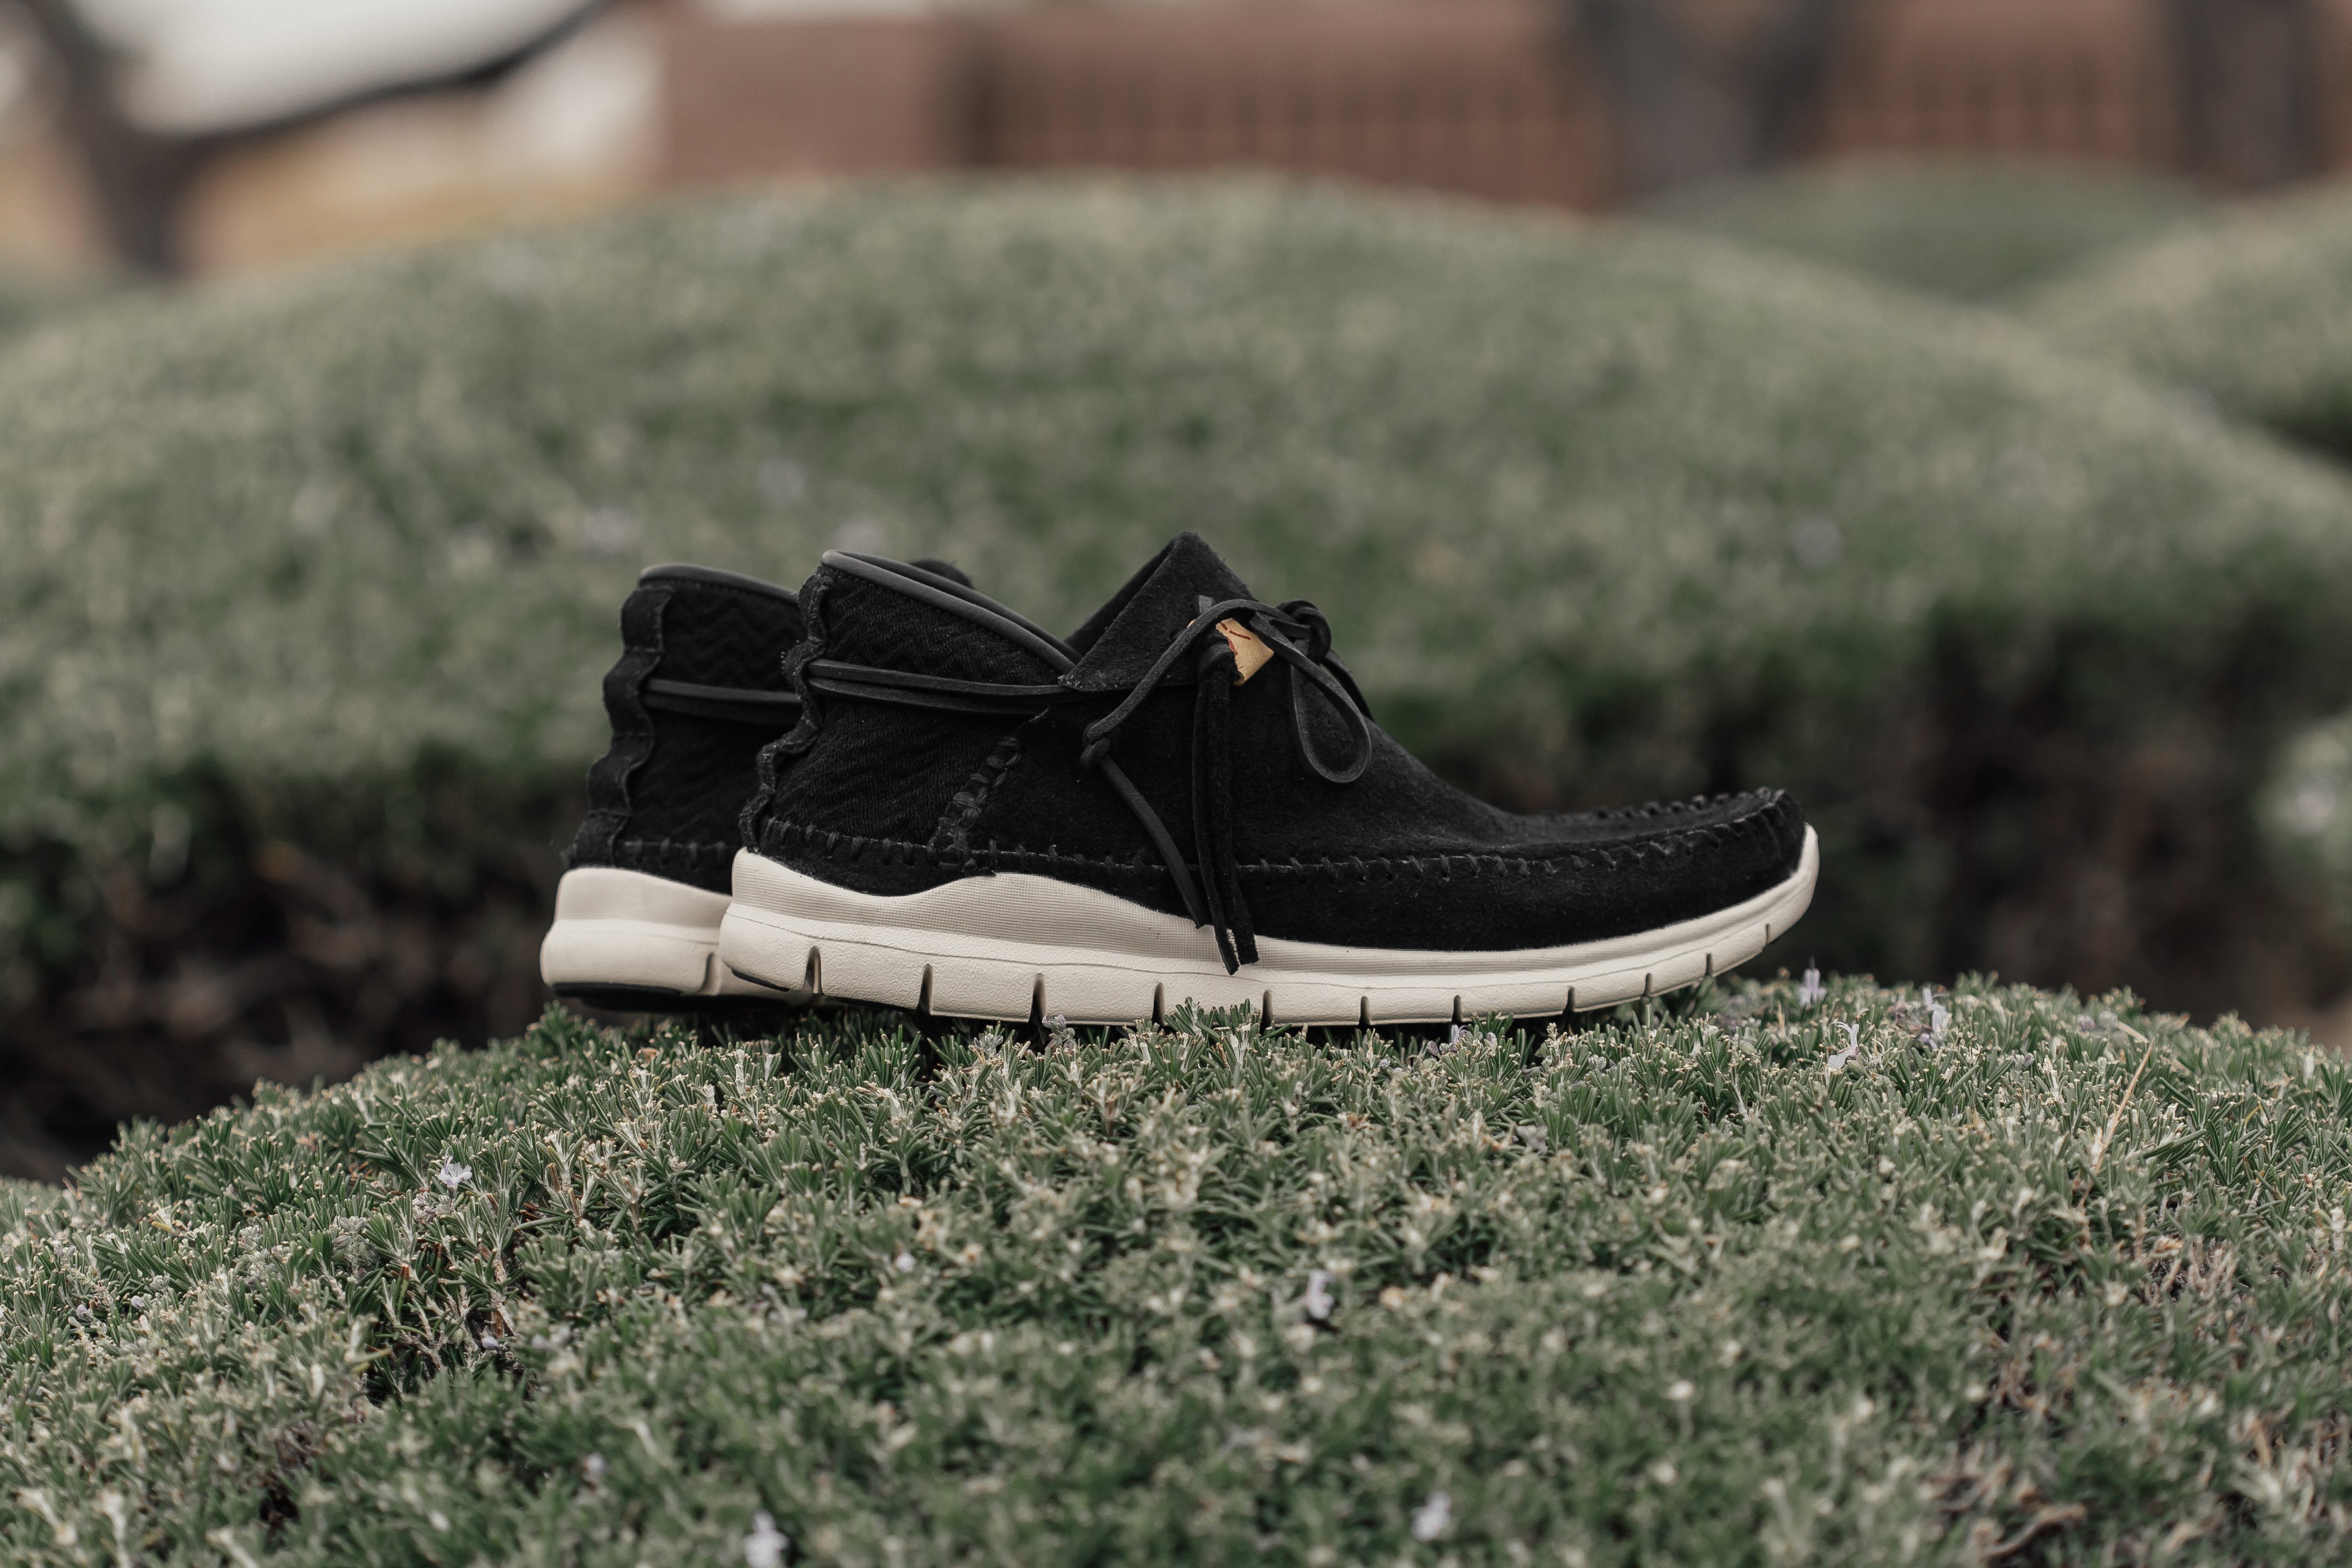 Visvim UTE Moc Trainer-Folk in Black Available Now – Feature